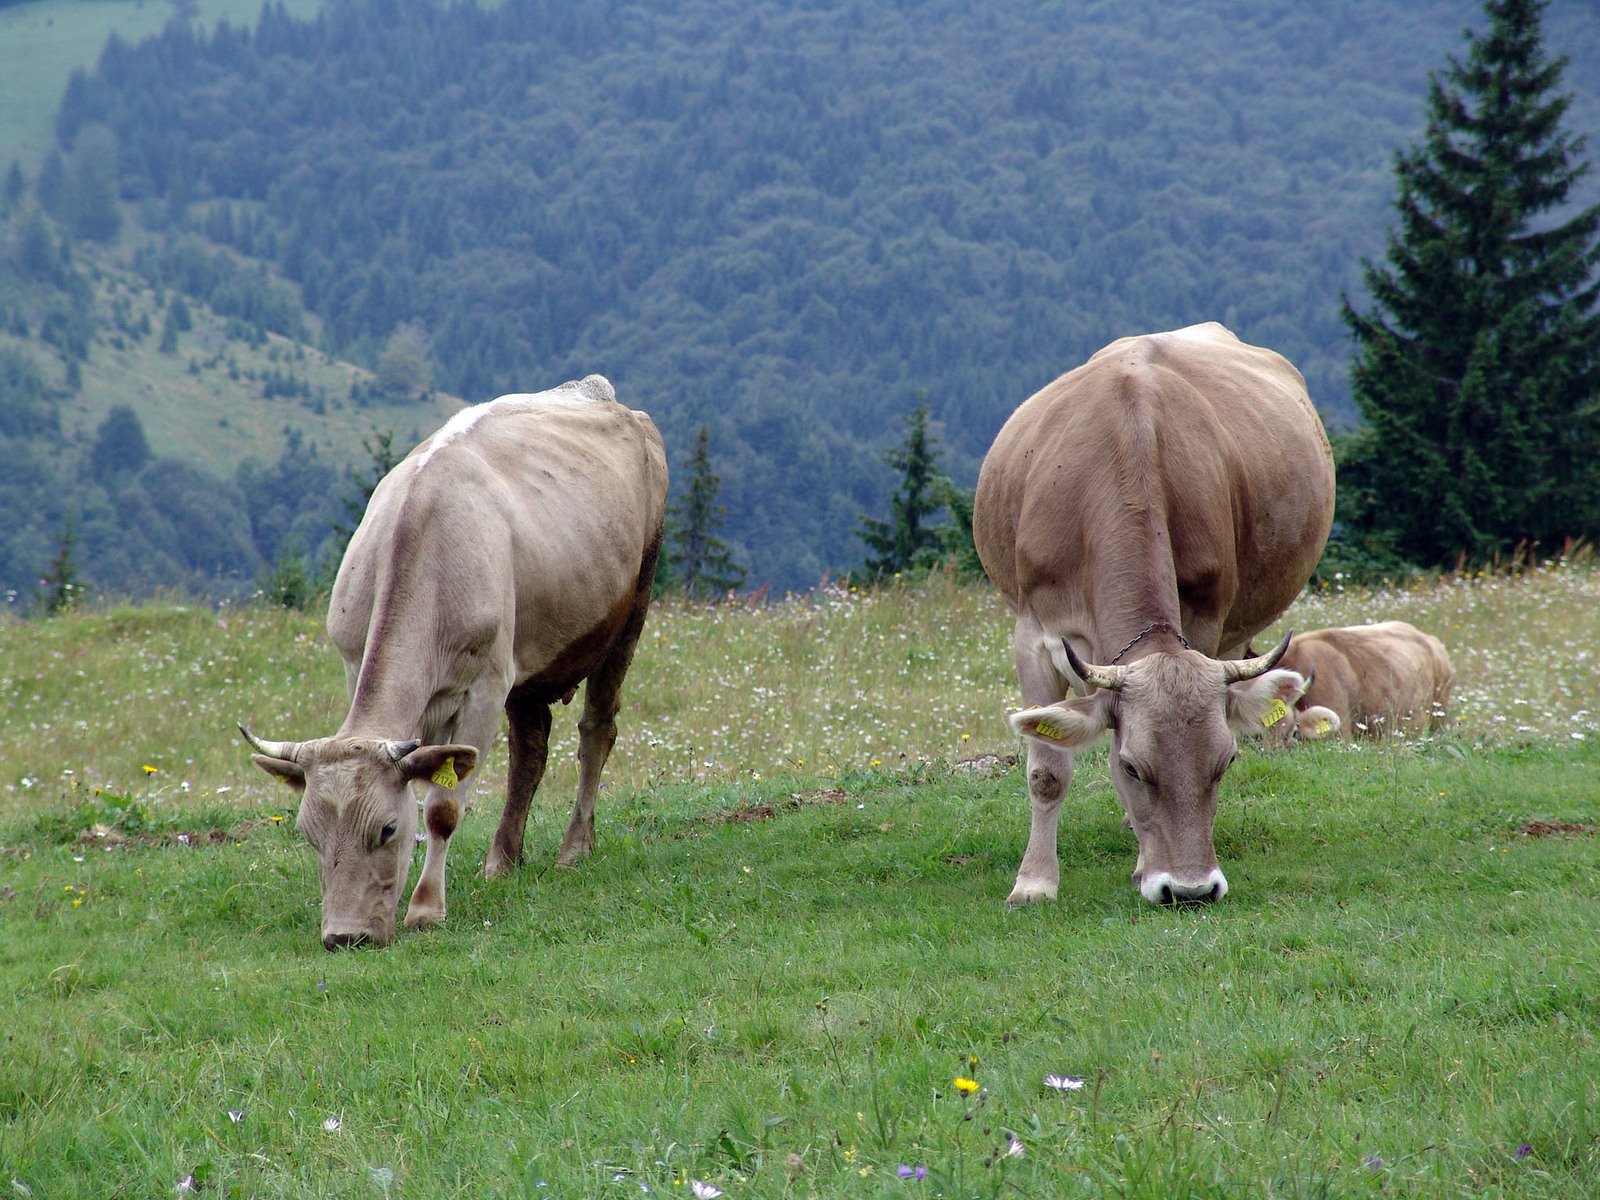 cows graze in the grass on the top of a hill